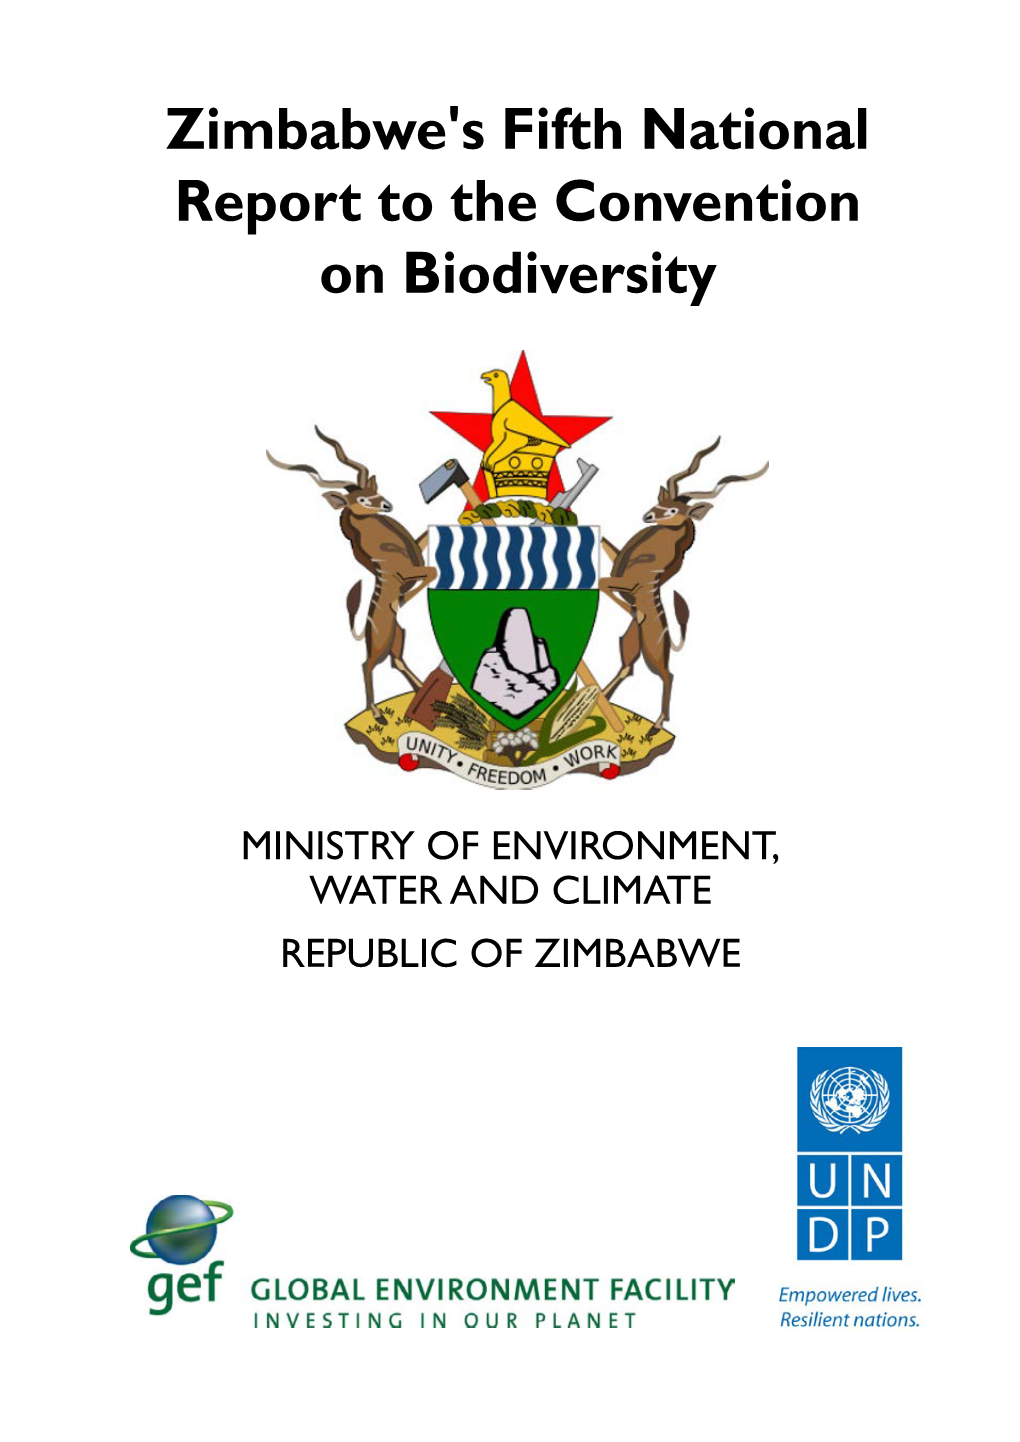 Zimbabwe's Fifth National Report to the Convention on Biodiversity